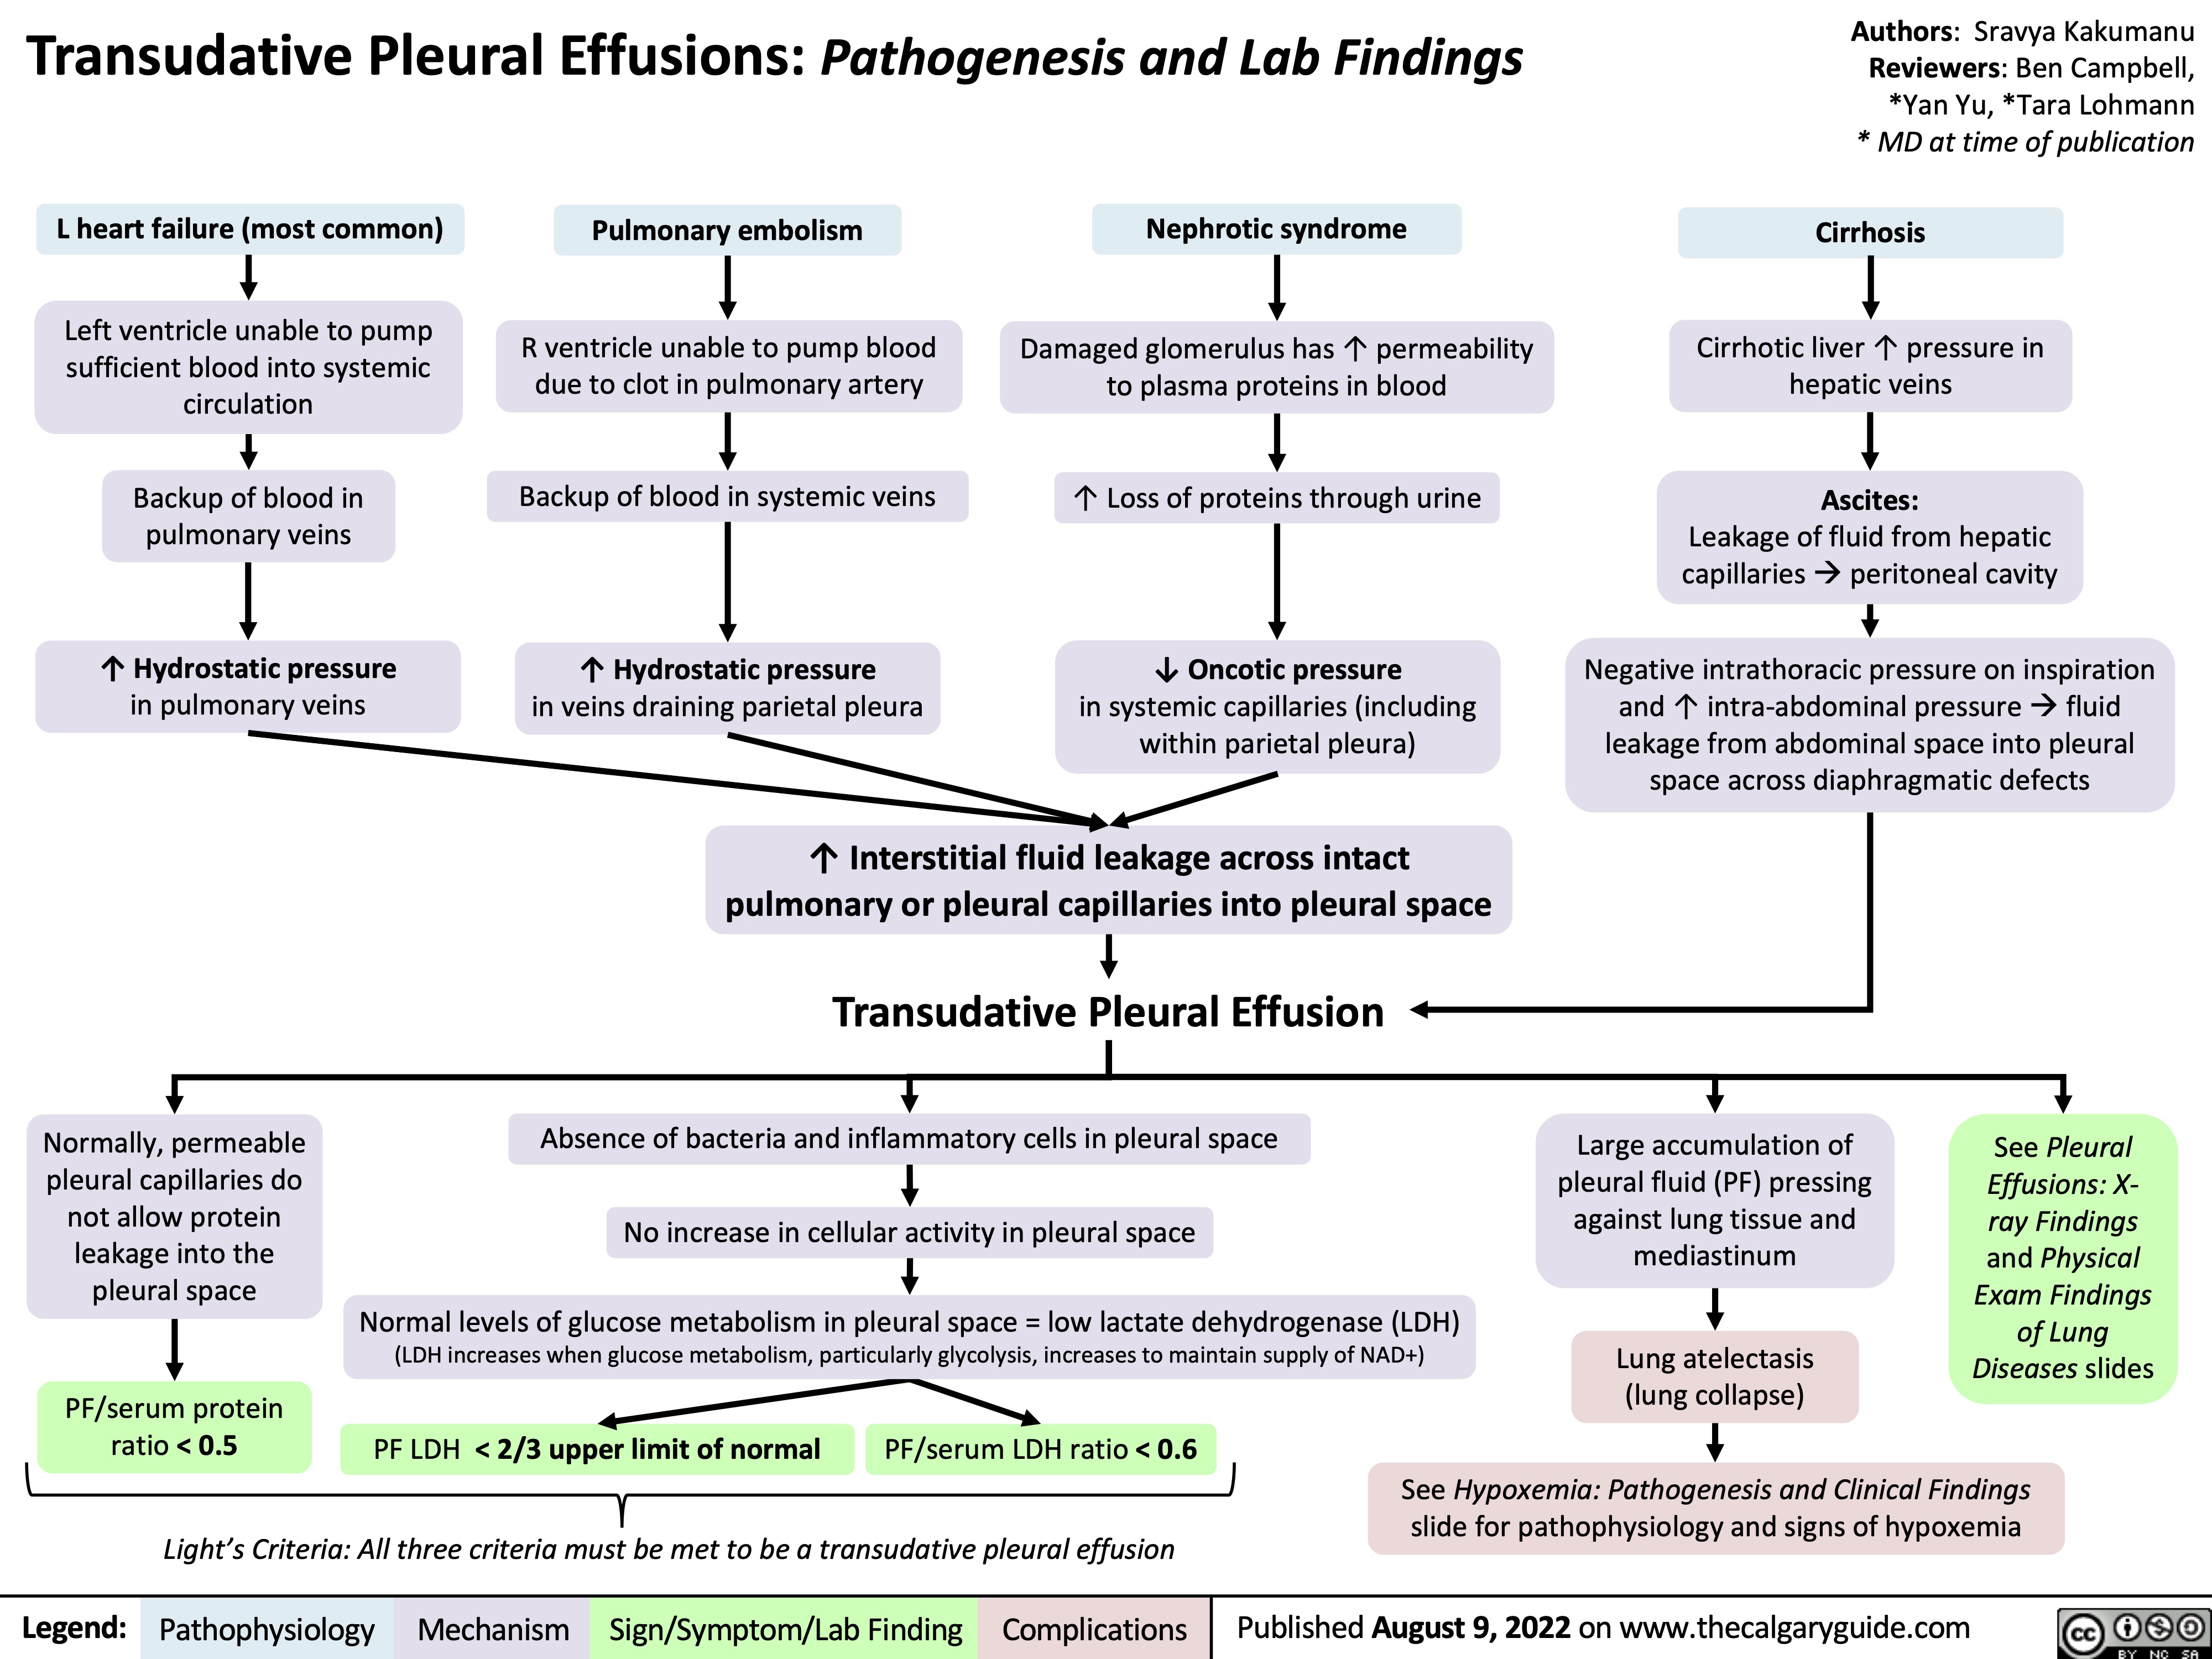 Transudative Pleural Effusions: Pathogenesis and Lab Findings
Authors: Sravya Kakumanu Reviewers: Ben Campbell, *Yan Yu, *Tara Lohmann * MD at time of publication
Cirrhosis
Cirrhotic liver ↑ pressure in hepatic veins
Ascites:
Leakage of fluid from hepatic capillariesàperitoneal cavity
Negative intrathoracic pressure on inspiration and ↑ intra-abdominal pressureàfluid leakage from abdominal space into pleural space across diaphragmatic defects
    L heart failure (most common)
Left ventricle unable to pump sufficient blood into systemic circulation
Backup of blood in pulmonary veins
↑ Hydrostatic pressure
in pulmonary veins
Pulmonary embolism
R ventricle unable to pump blood due to clot in pulmonary artery
Backup of blood in systemic veins
↑ Hydrostatic pressure
in veins draining parietal pleura
Nephrotic syndrome
Damaged glomerulus has ↑ permeability to plasma proteins in blood
↑ Loss of proteins through urine
↓ Oncotic pressure
in systemic capillaries (including within parietal pleura)
                         Normally, permeable pleural capillaries do not allow protein leakage into the pleural space
↑ Interstitial fluid leakage across intact pulmonary or pleural capillaries into pleural space
Transudative Pleural Effusion
Absence of bacteria and inflammatory cells in pleural space
No increase in cellular activity in pleural space
Normal levels of glucose metabolism in pleural space = low lactate dehydrogenase (LDH) (LDH increases when glucose metabolism, particularly glycolysis, increases to maintain supply of NAD+)
Large accumulation of pleural fluid (PF) pressing against lung tissue and mediastinum
Lung atelectasis (lung collapse)
See Pleural Effusions: X- ray Findings and Physical Exam Findings of Lung Diseases slides
     PF/serum protein ratio < 0.5
  PF LDH < 2/3 upper limit of normal
Light’s Criteria: All three criteria must be met to be a transudative pleural effusion
PF/serum LDH ratio < 0.6
  See Hypoxemia: Pathogenesis and Clinical Findings slide for pathophysiology and signs of hypoxemia
Legend:
Pathophysiology
Mechanism
Sign/Symptom/Lab Finding
Complications
Published August 9, 2022 on www.thecalgaryguide.com